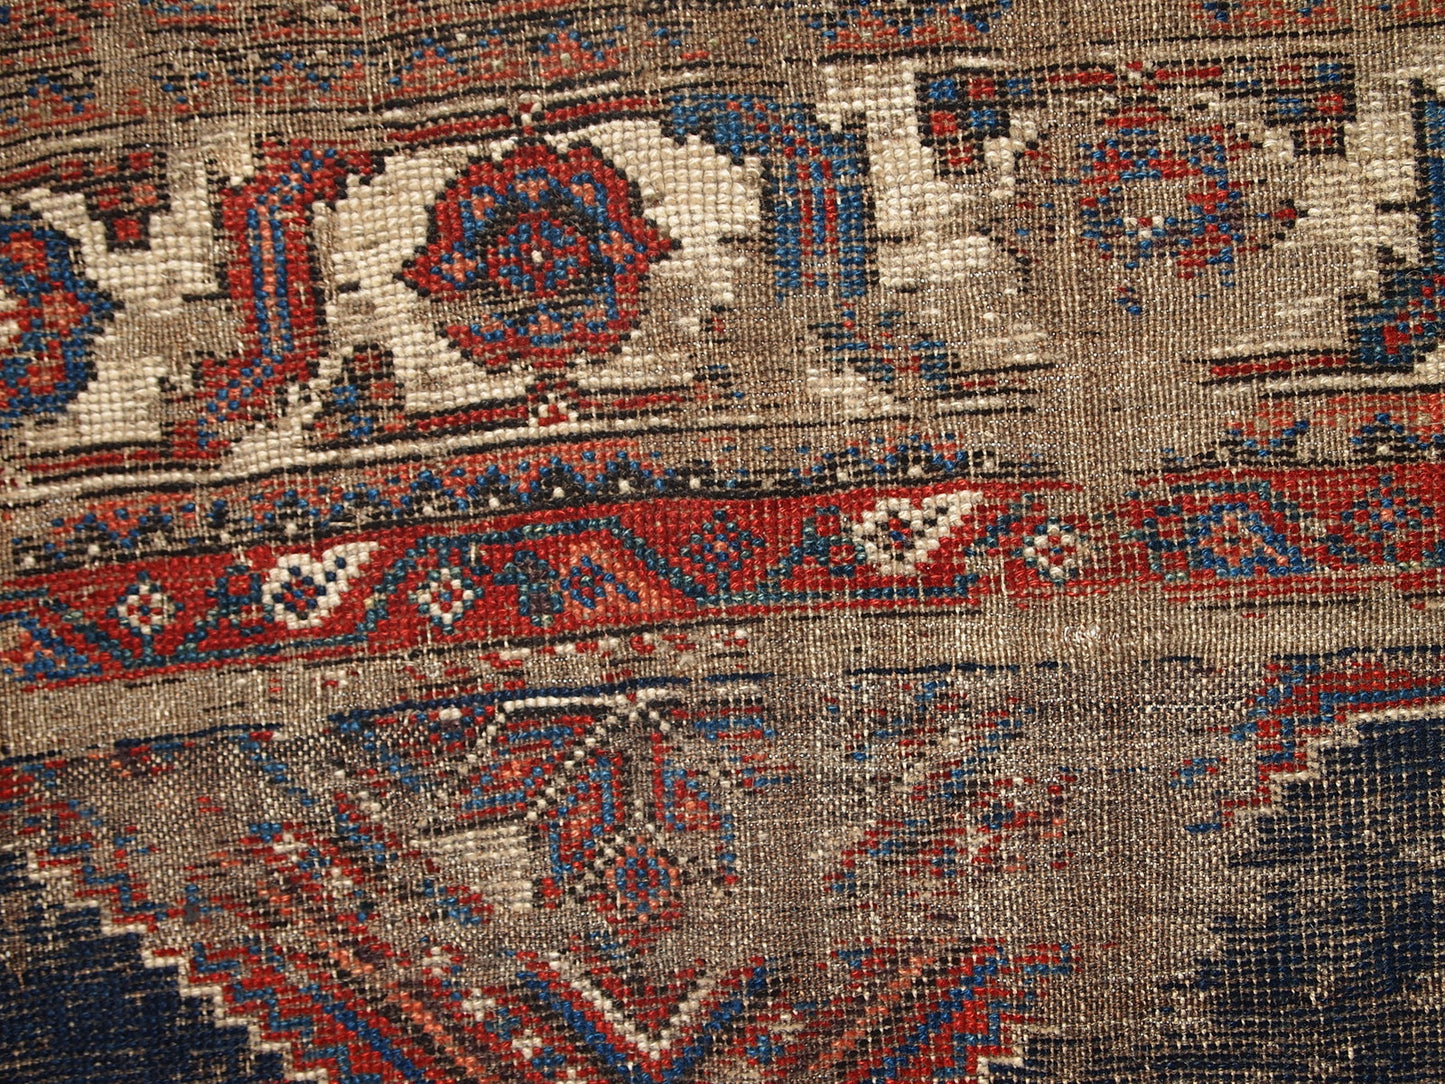 Antique Persian Shiraz rug in distressed condition. The rug made in traditional tribal design in the beginning of 20th century.